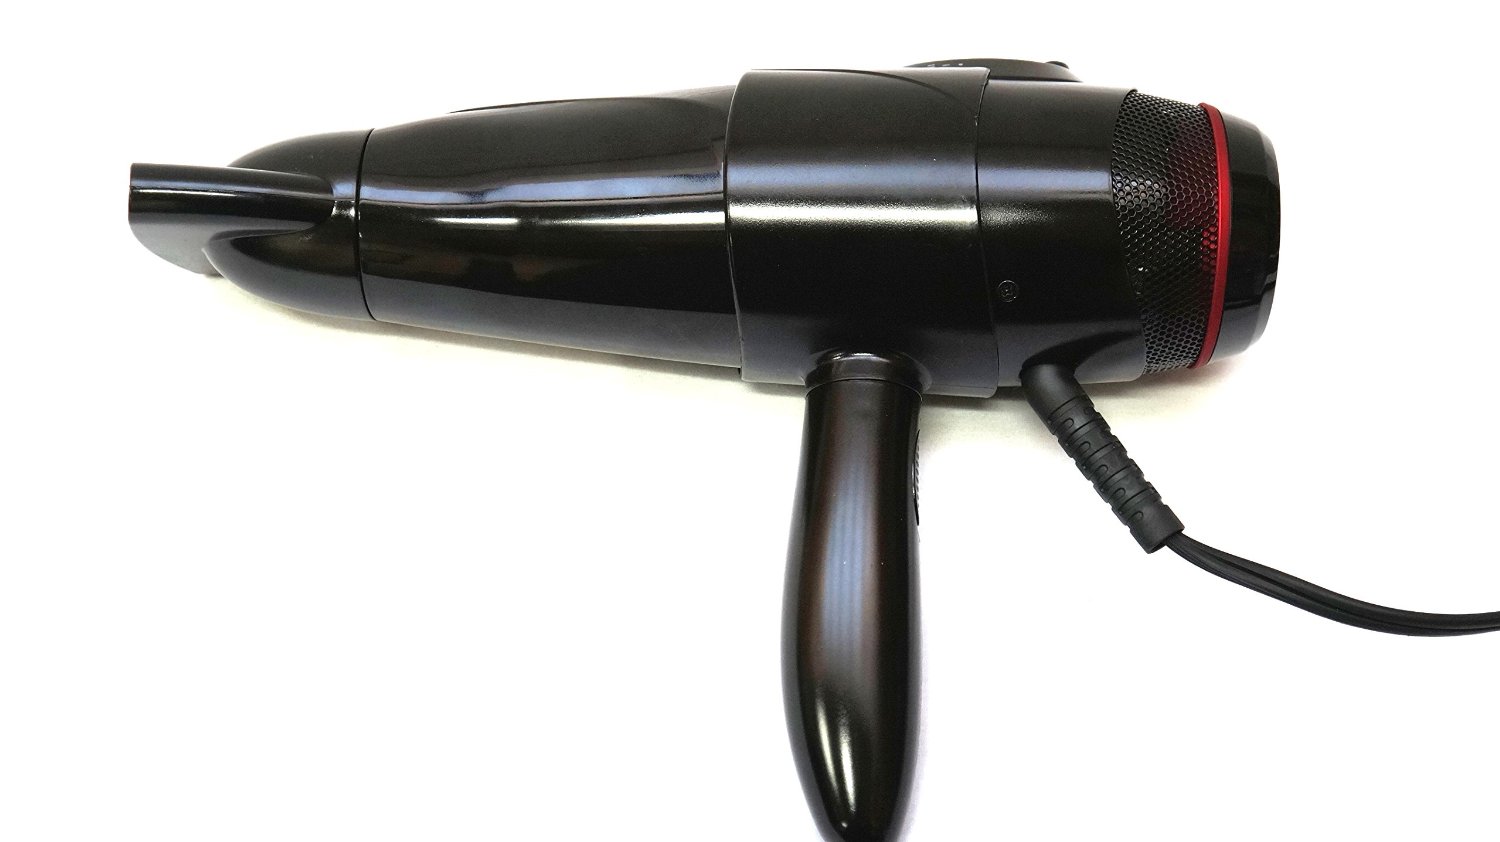 NIA hands free professional hair dryer